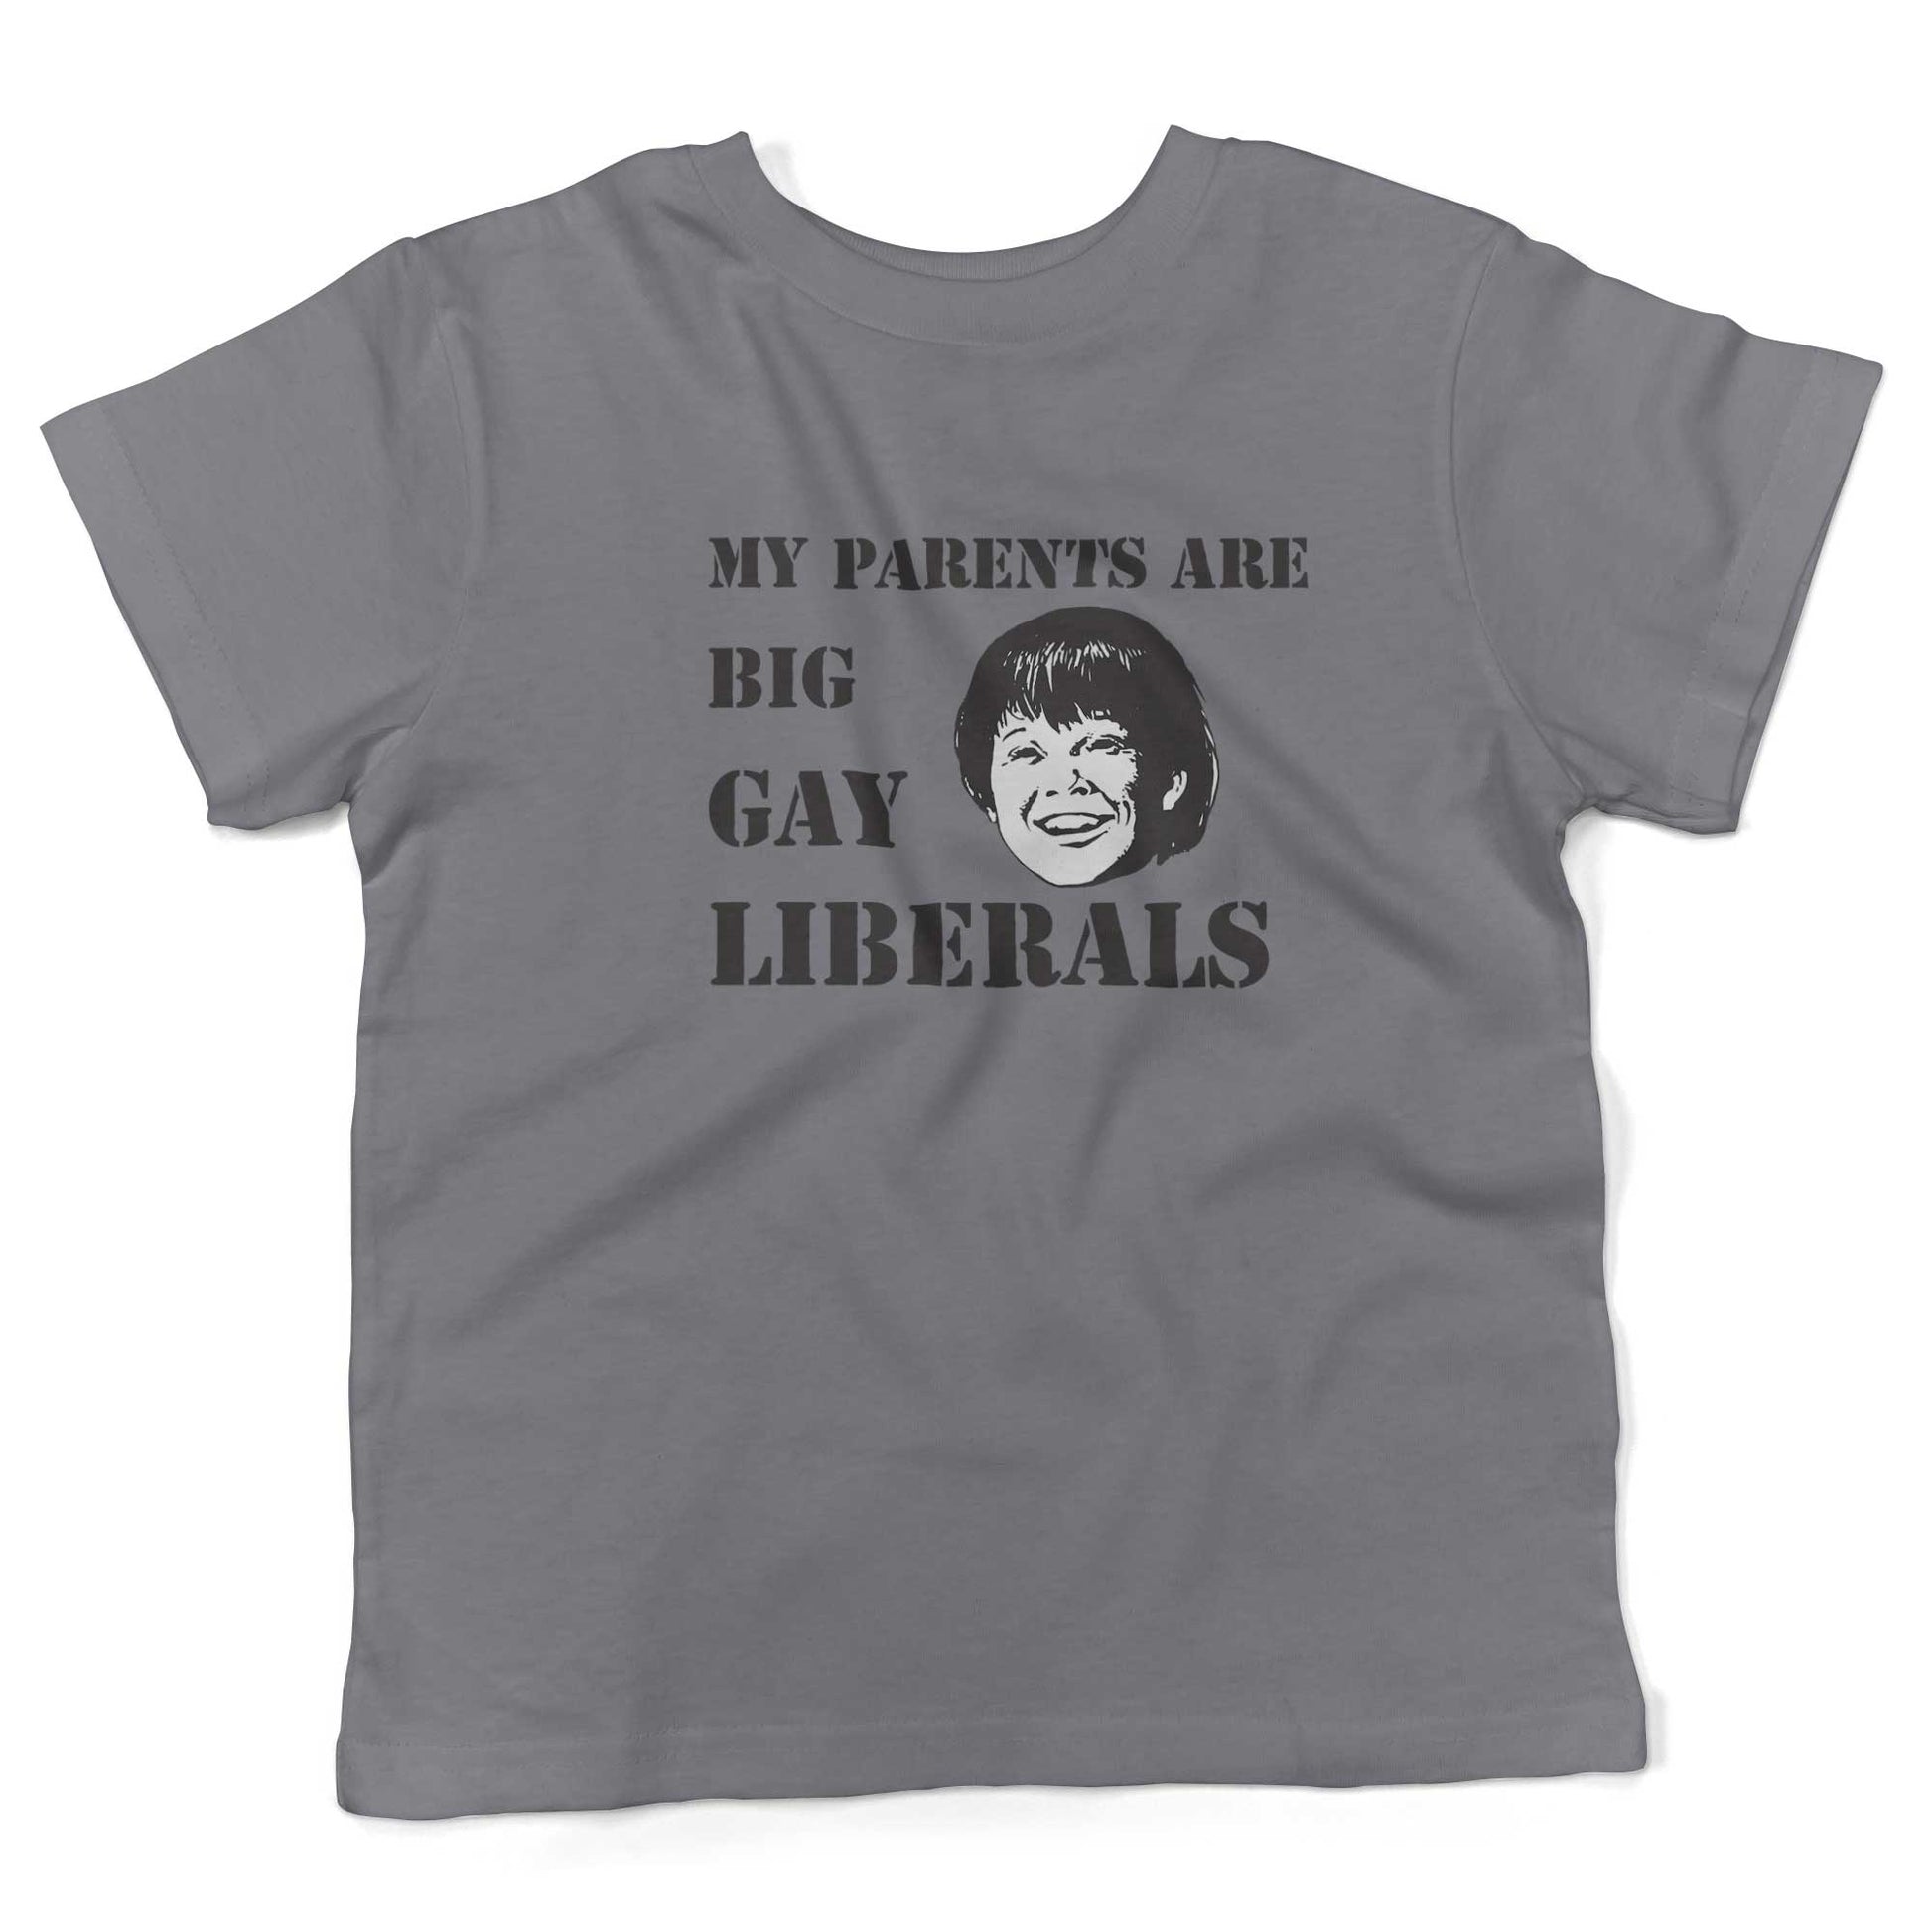 My Parents Are Big, Gay Liberals Toddler Shirt-Slate-2T